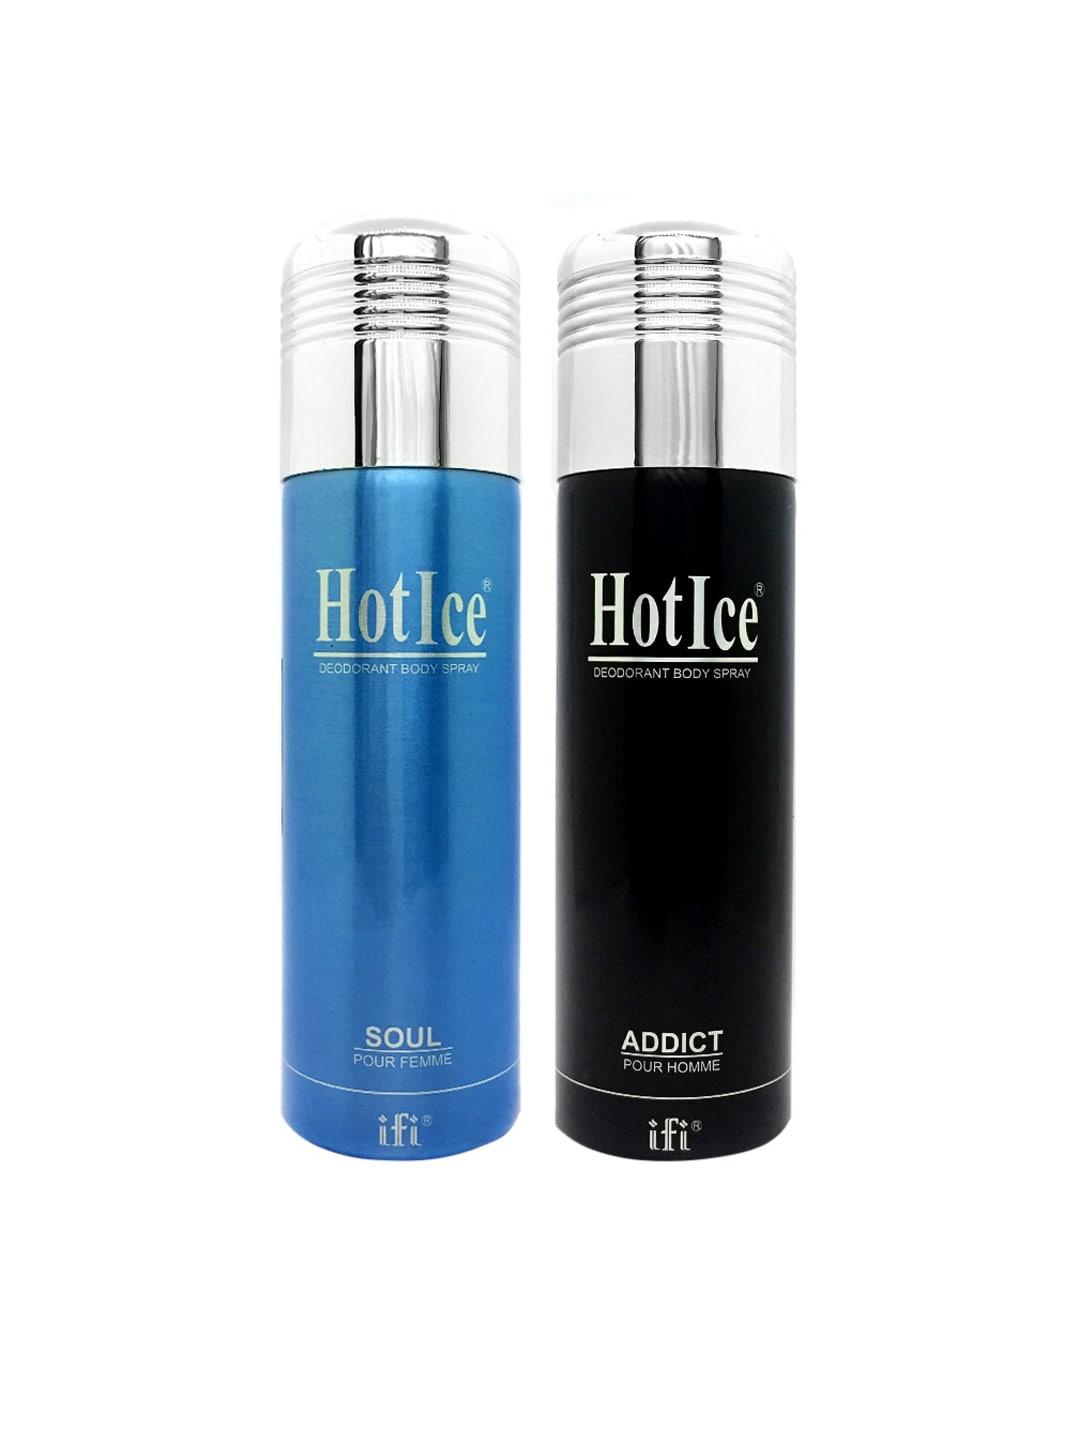 Hot Ice Blue Set of 2 Soul Fomme & Addict Homme Deodorant 200ml Each